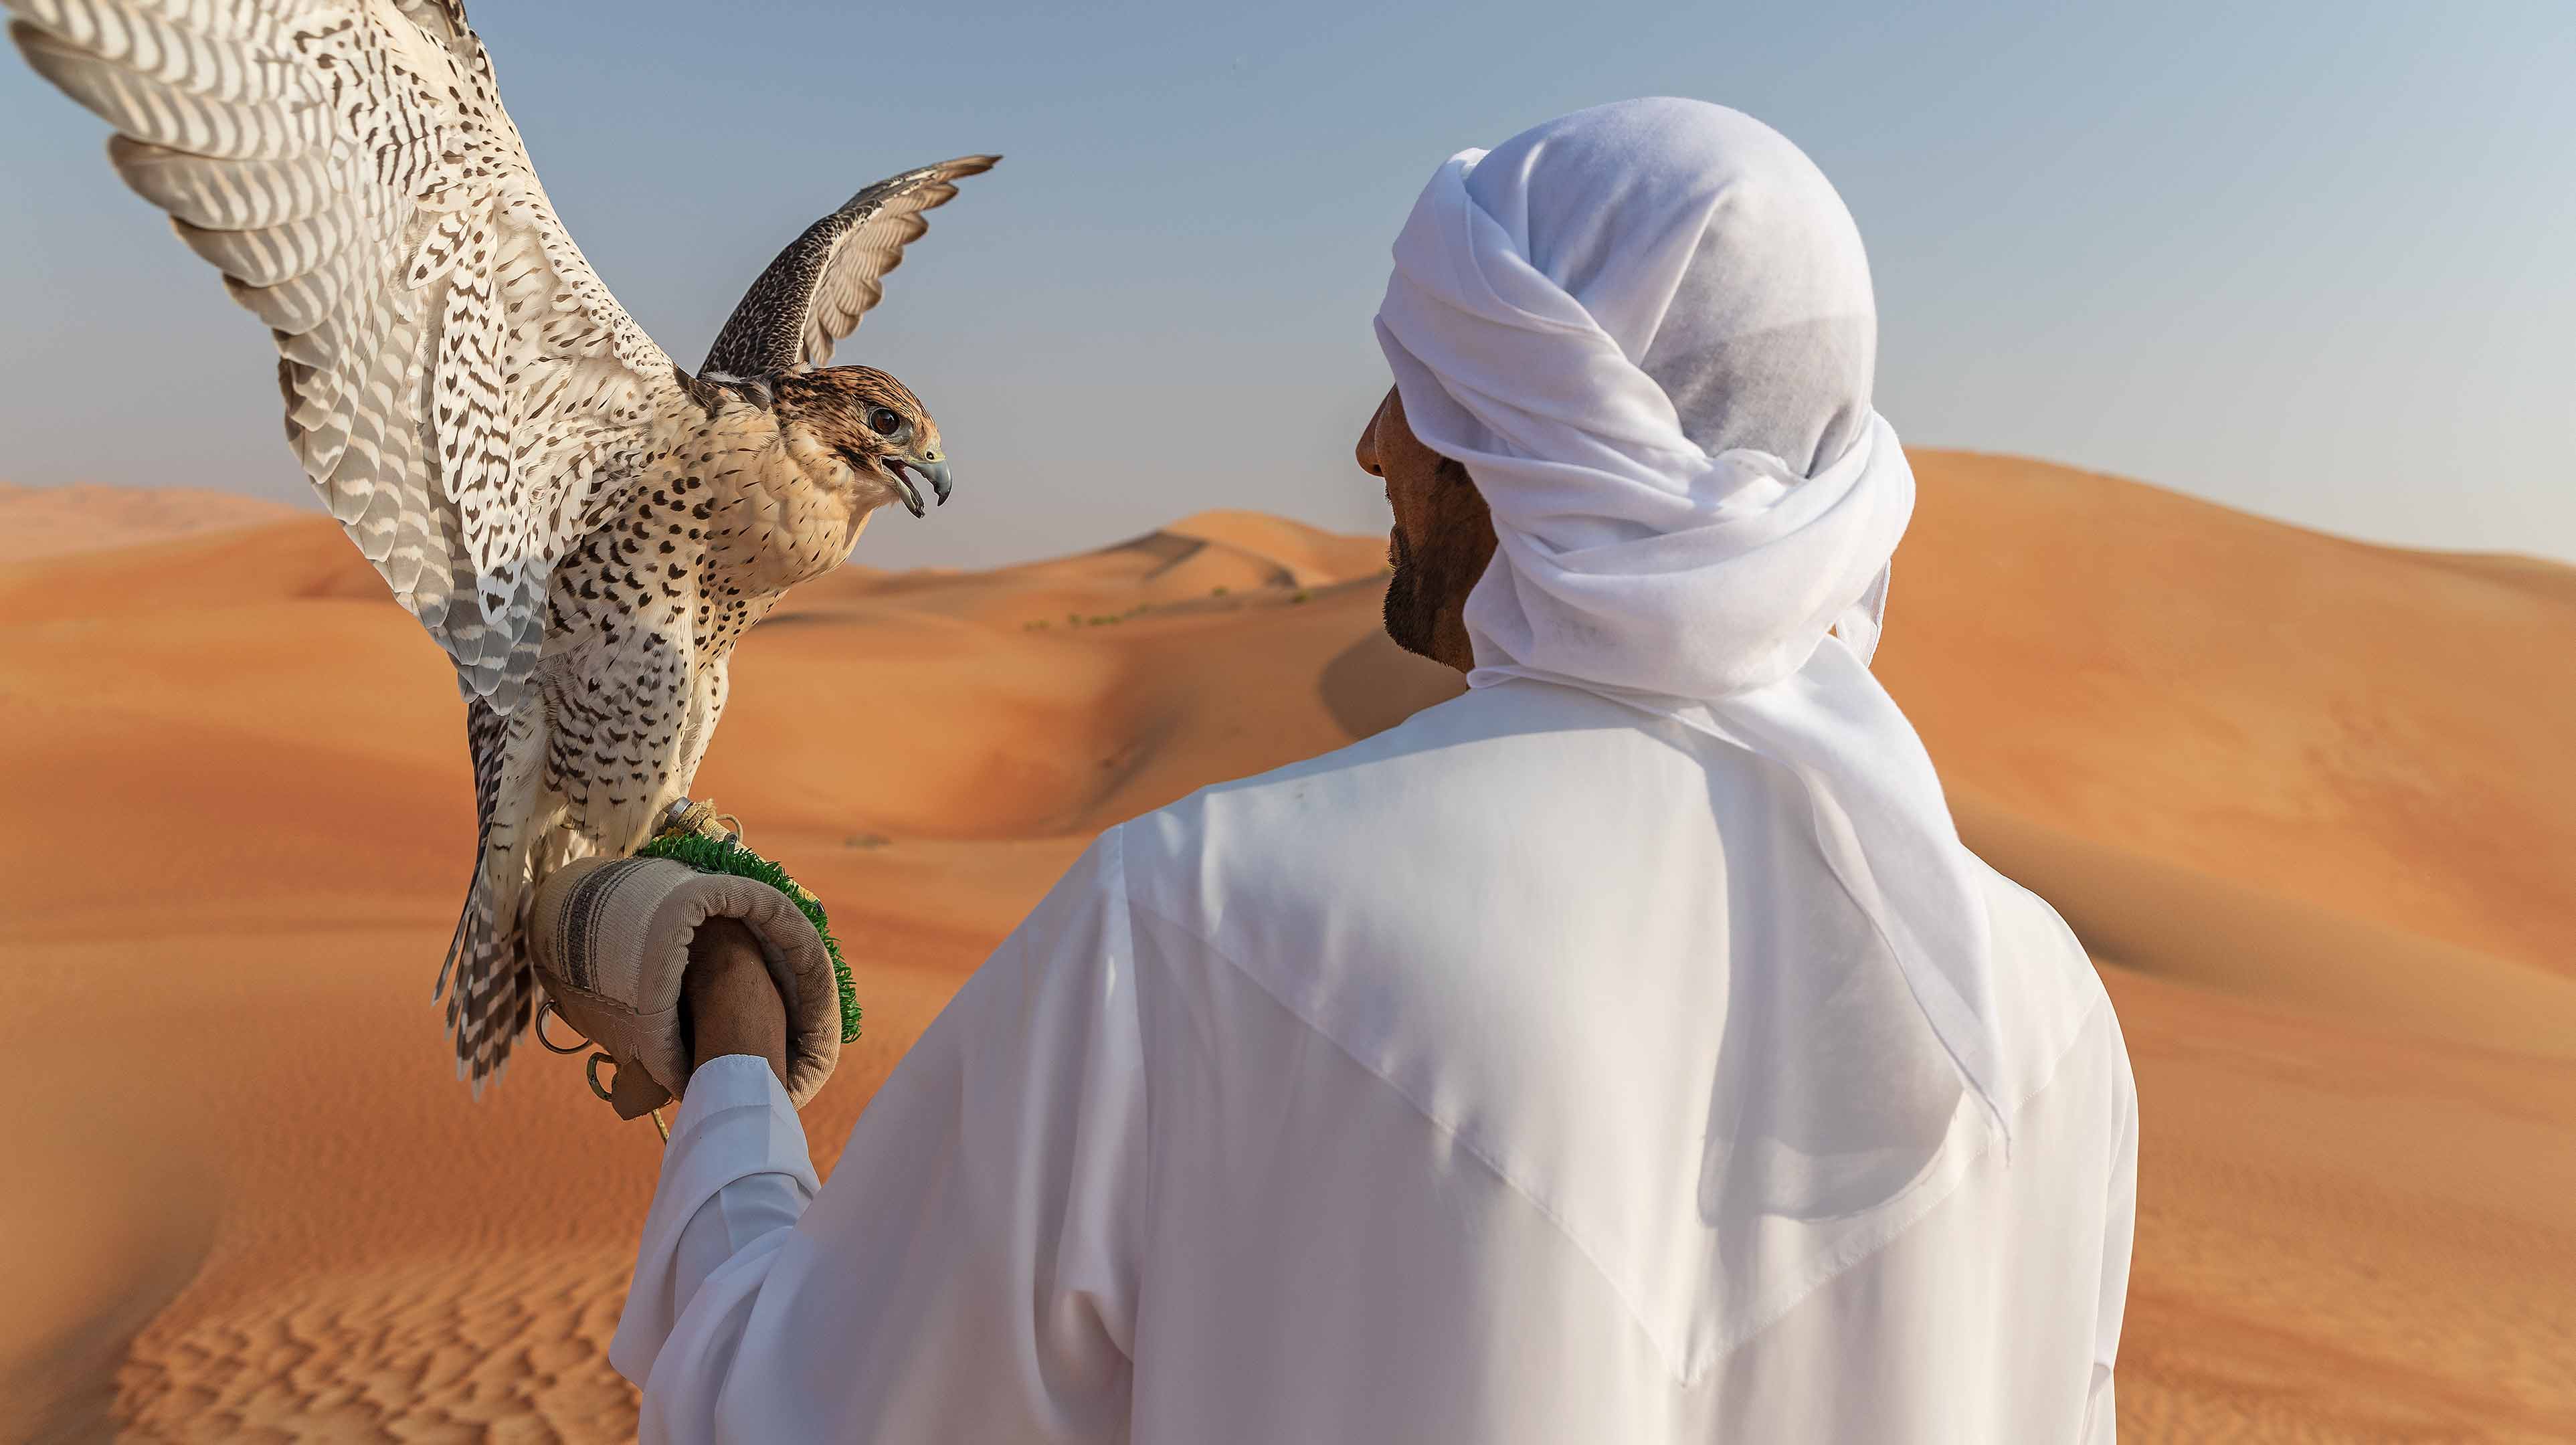 Emirati man with his falcon amidst the golden sand dunes of the Abu Dhabi desert